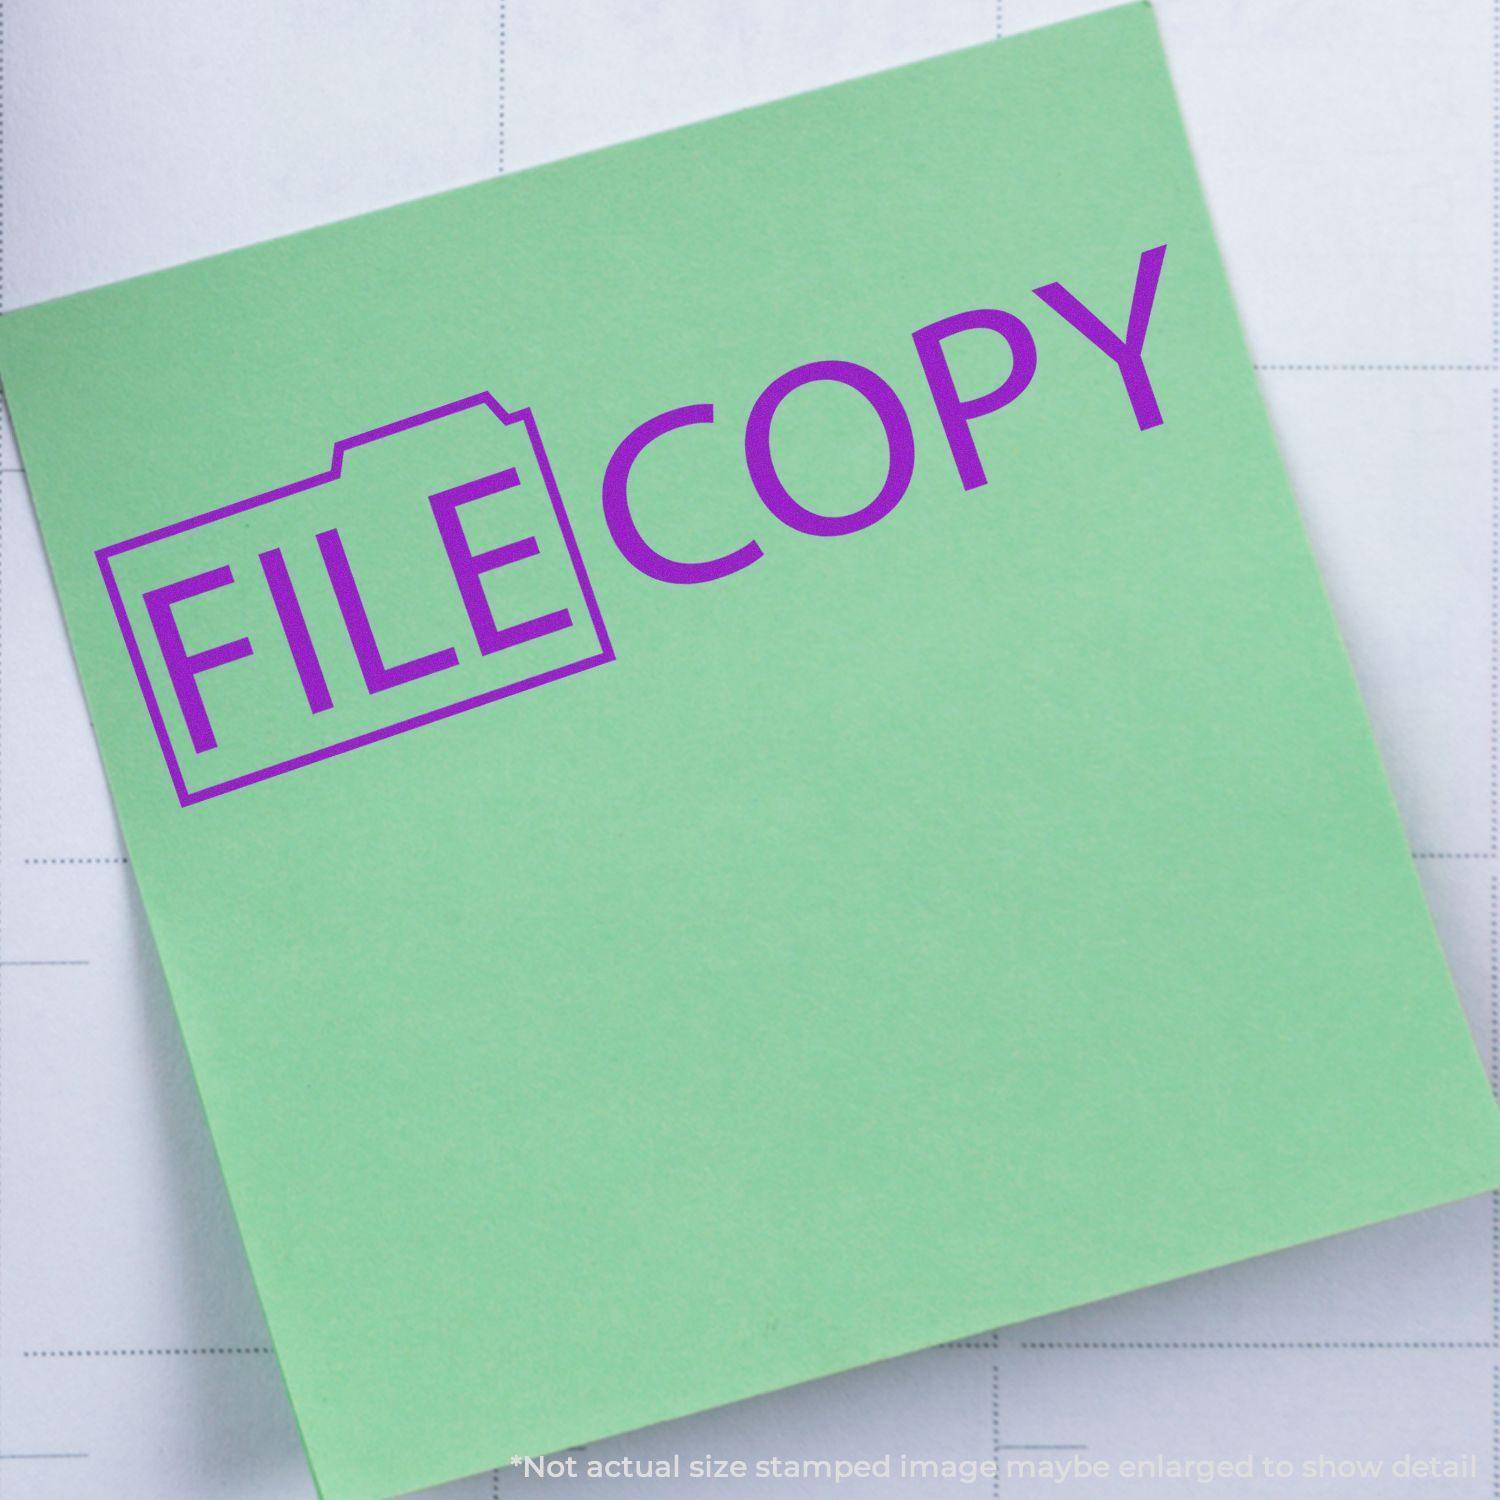 A self-inking stamp with a stamped image showing how the text "FILE COPY" with a graphic of a folder is displayed after stamping.